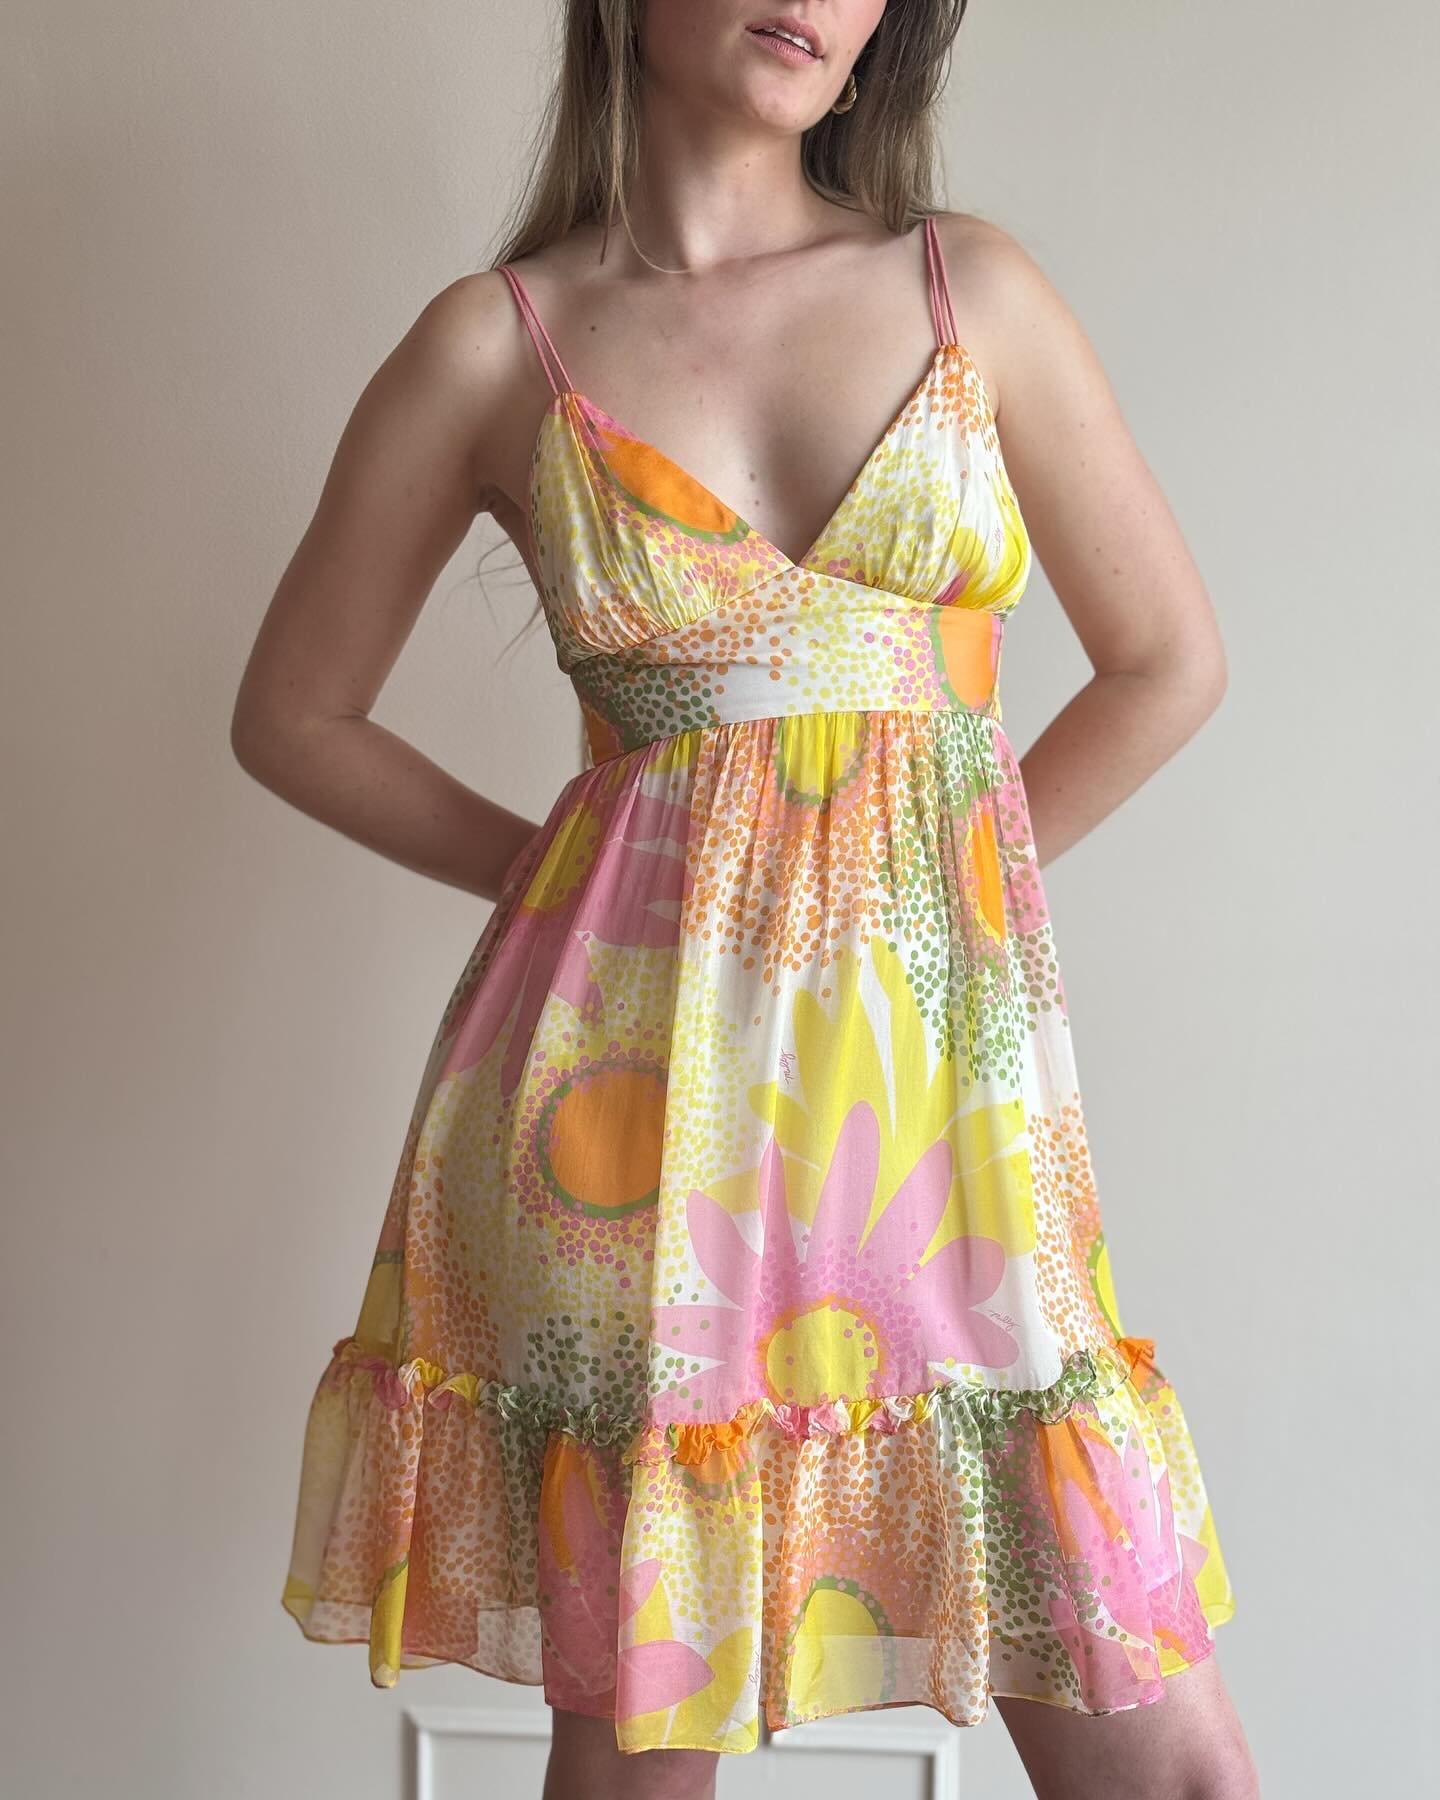 Silk floral flounce dress by Milly / S featured on Ali / $98 / DM to purchase / Shipping available